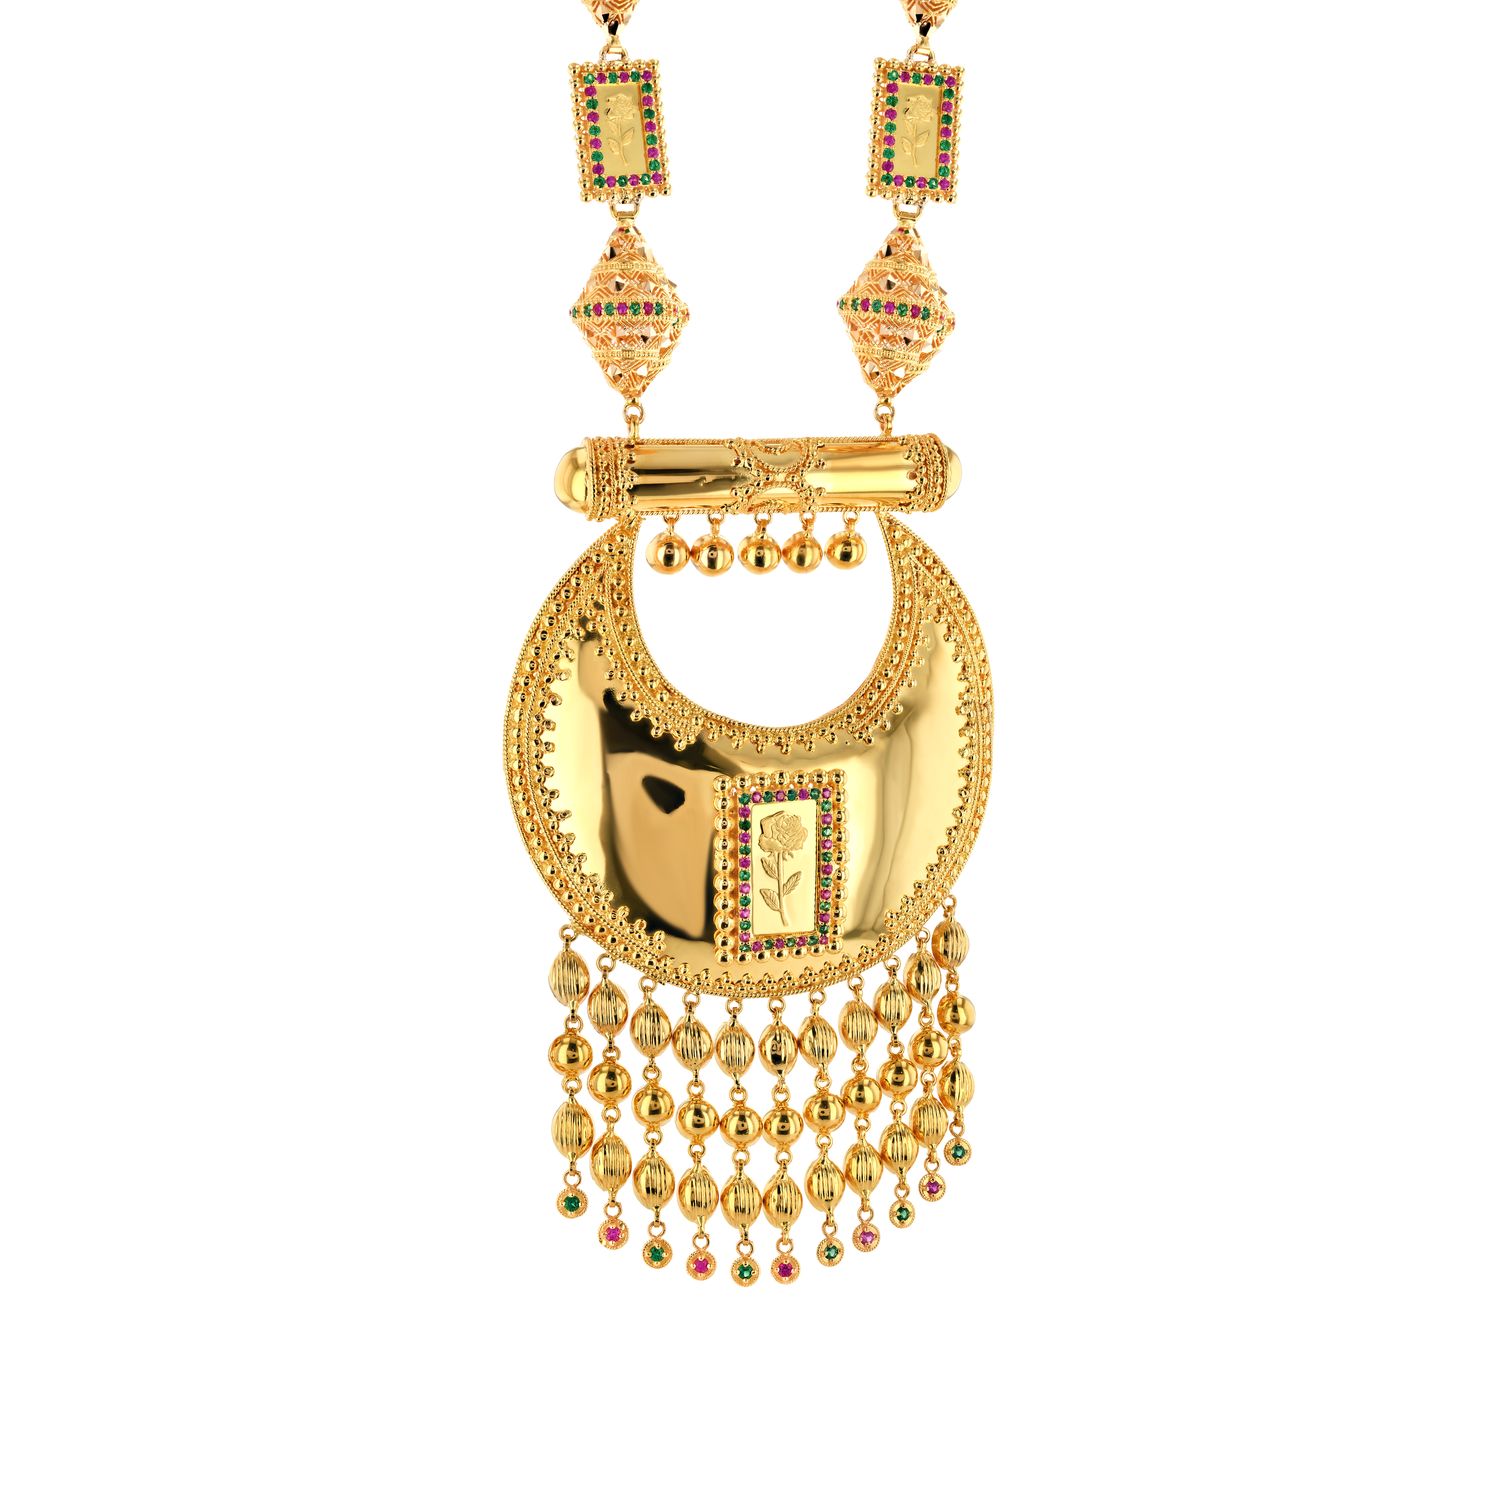 21K Traditional Gold Set With 24K Gold Bars